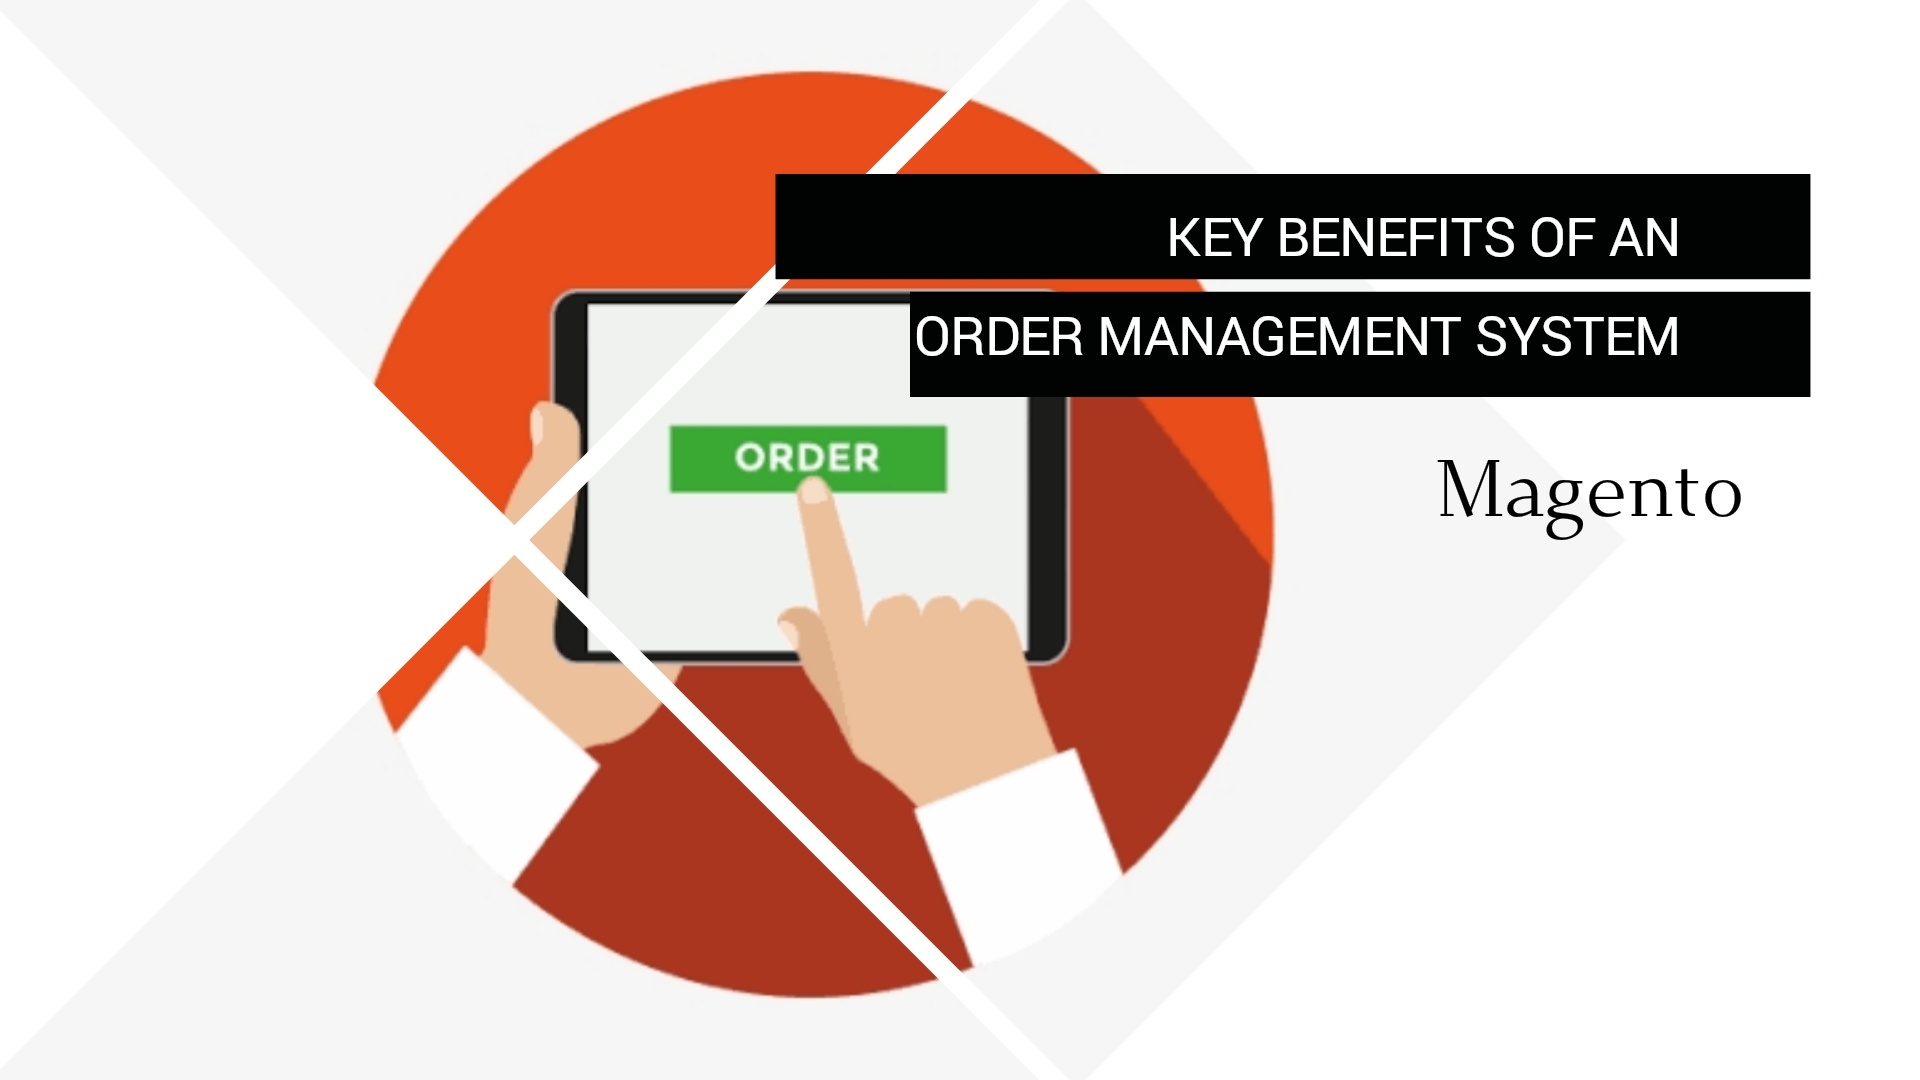 Key Benefits Of An Order Management System